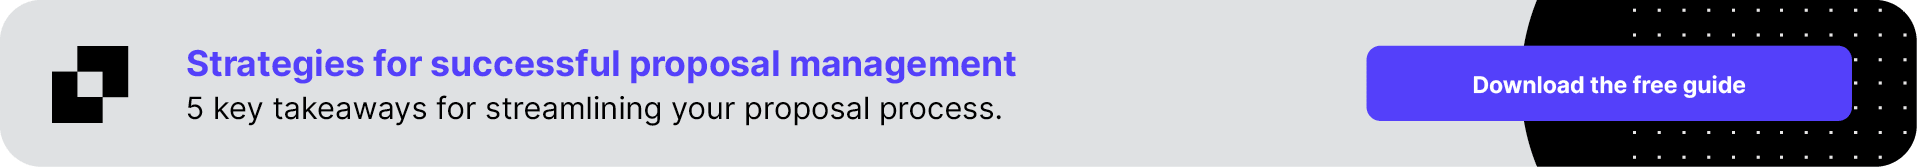 Project Risk Management - Strategies For Successful Proposal Management